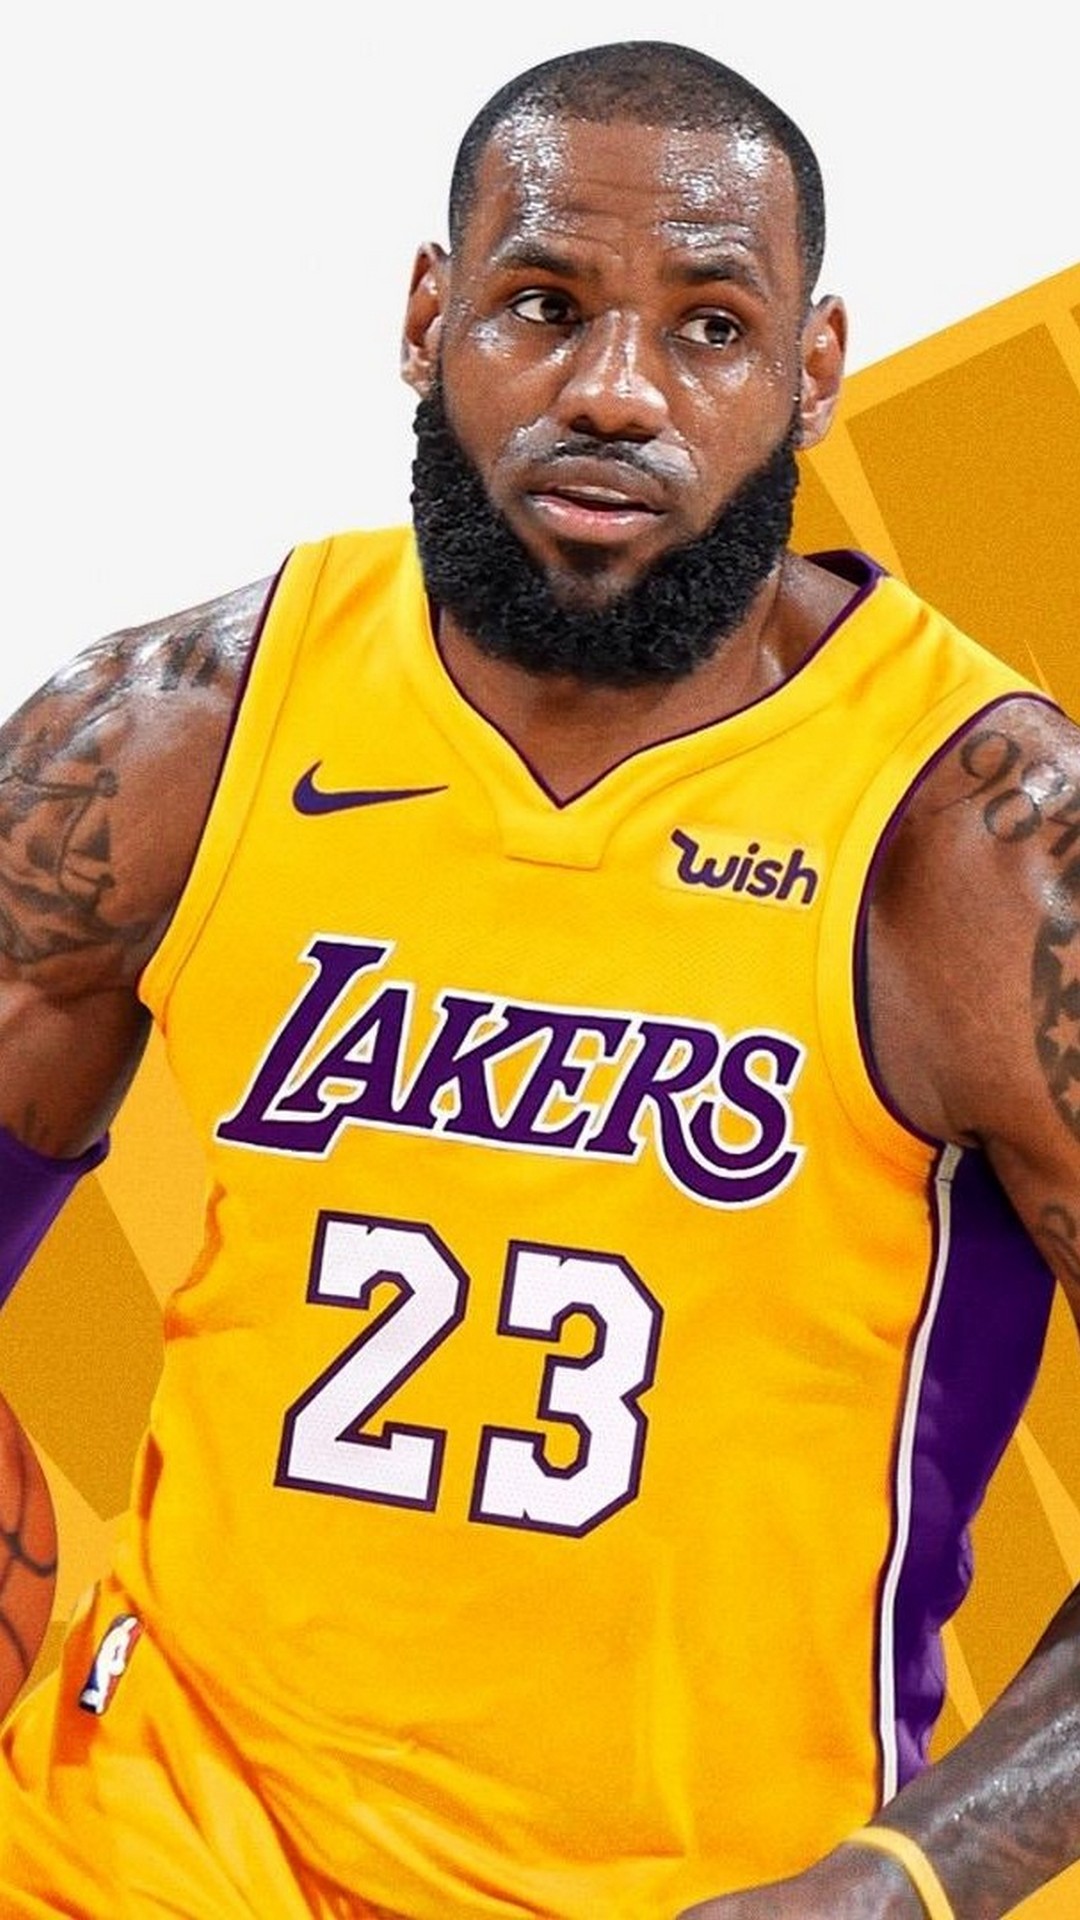 Lebron James Lakers Wallpaper iPhone With high-resolution 1080X1920 pixel. You can use this wallpaper for your iPhone 5, 6, 7, 8, X backgrounds, Mobile Screensaver, or iPad Lock Screen